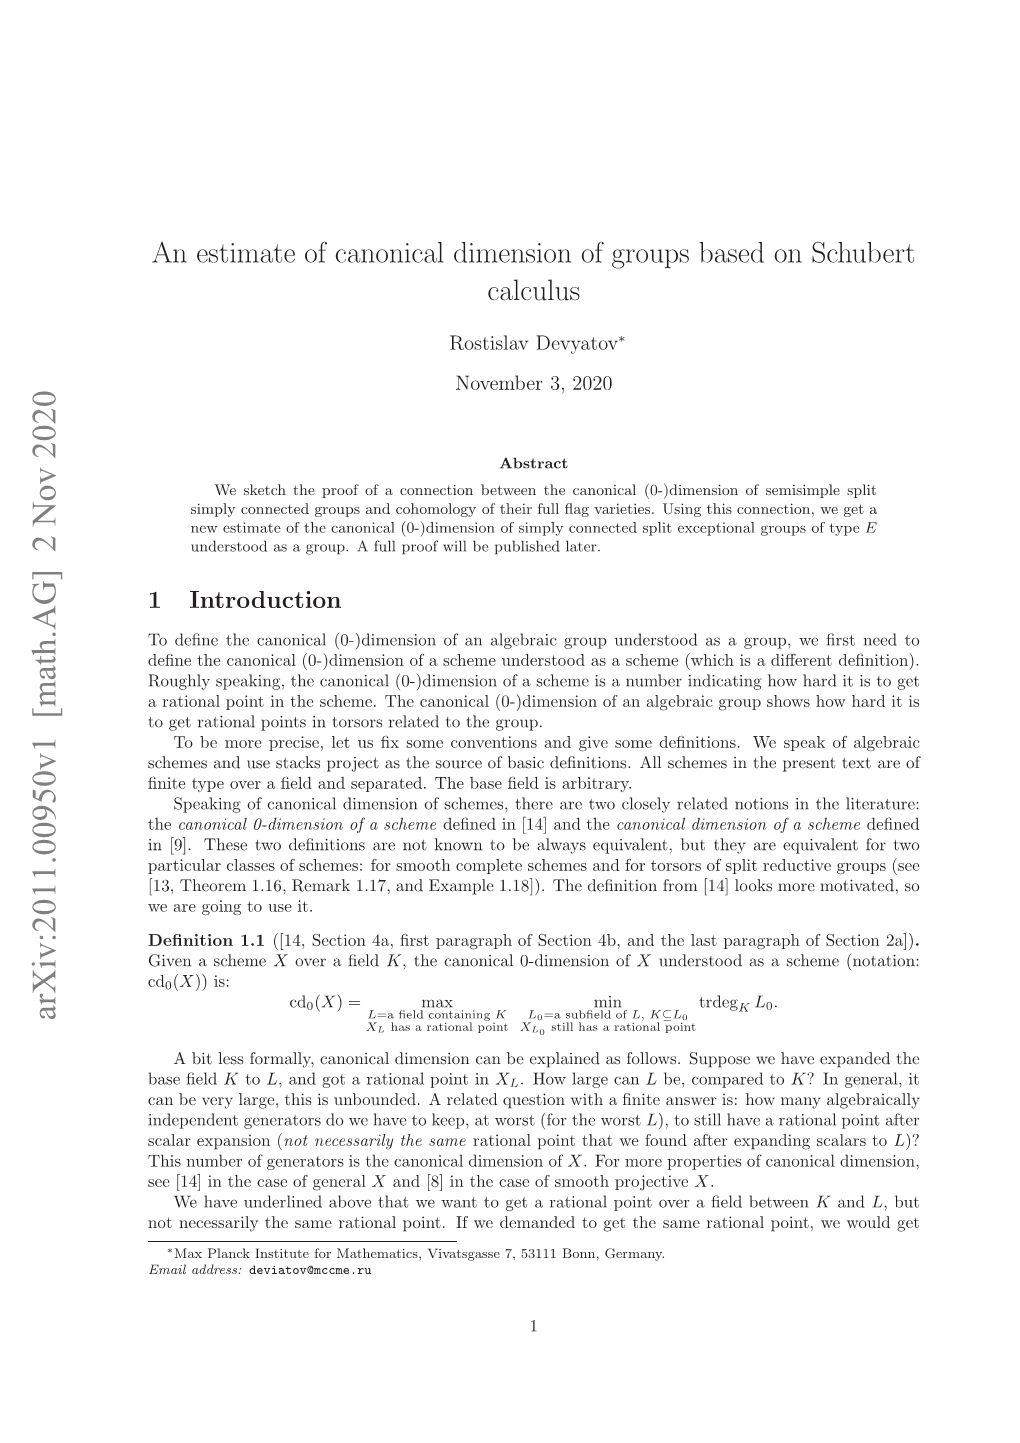 An Estimate of Canonical Dimension of Groups Based on Schubert Calculus